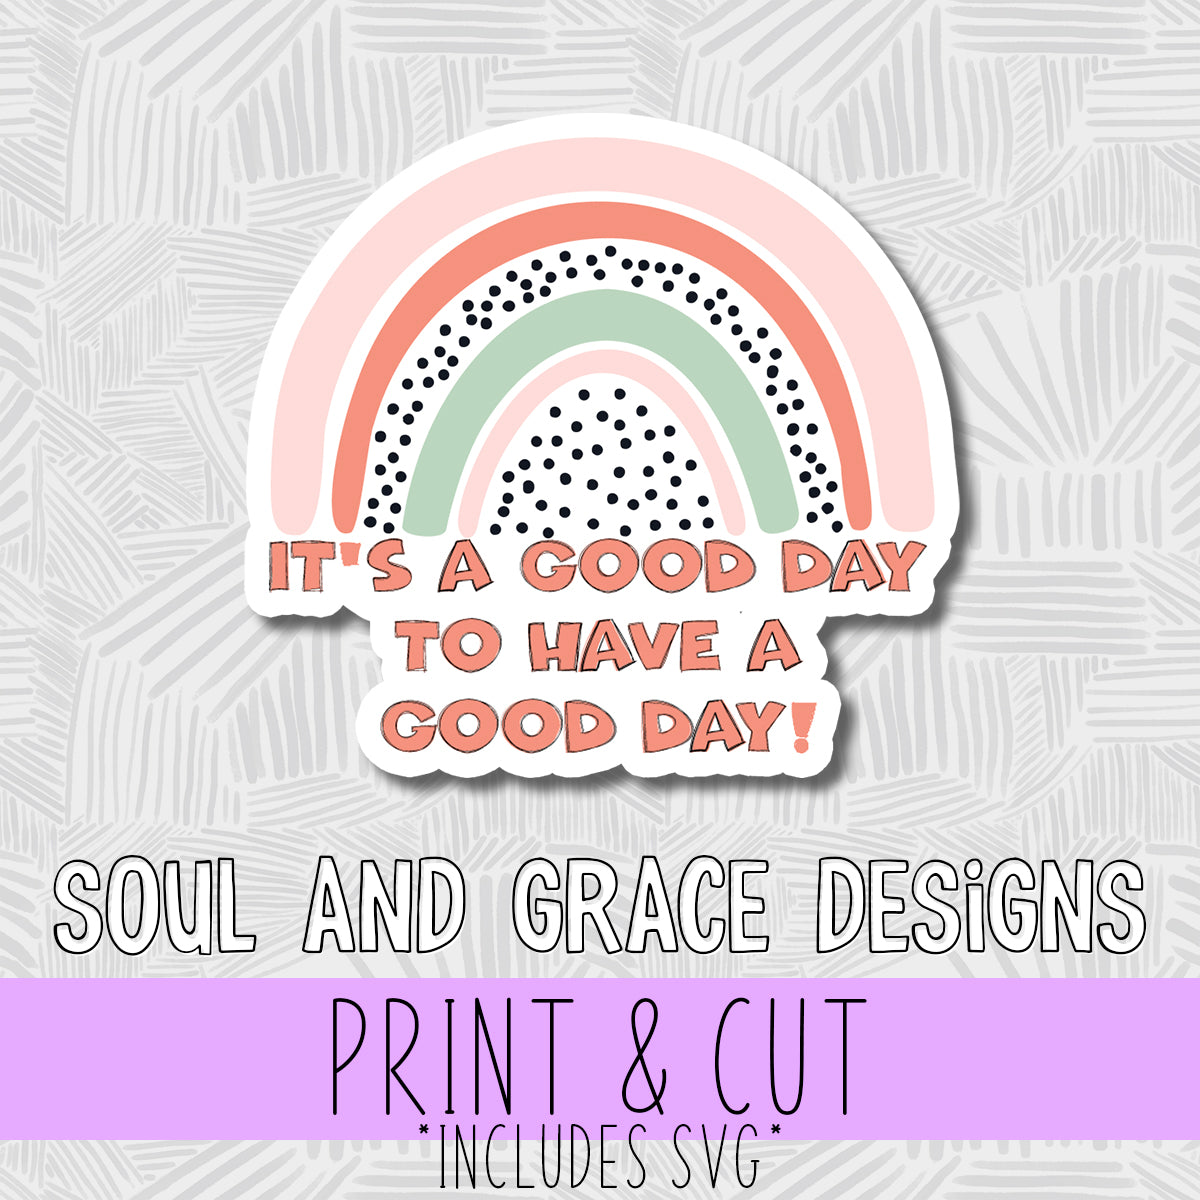 It's A Good Day to Have a Good Day [Digital Sticker]